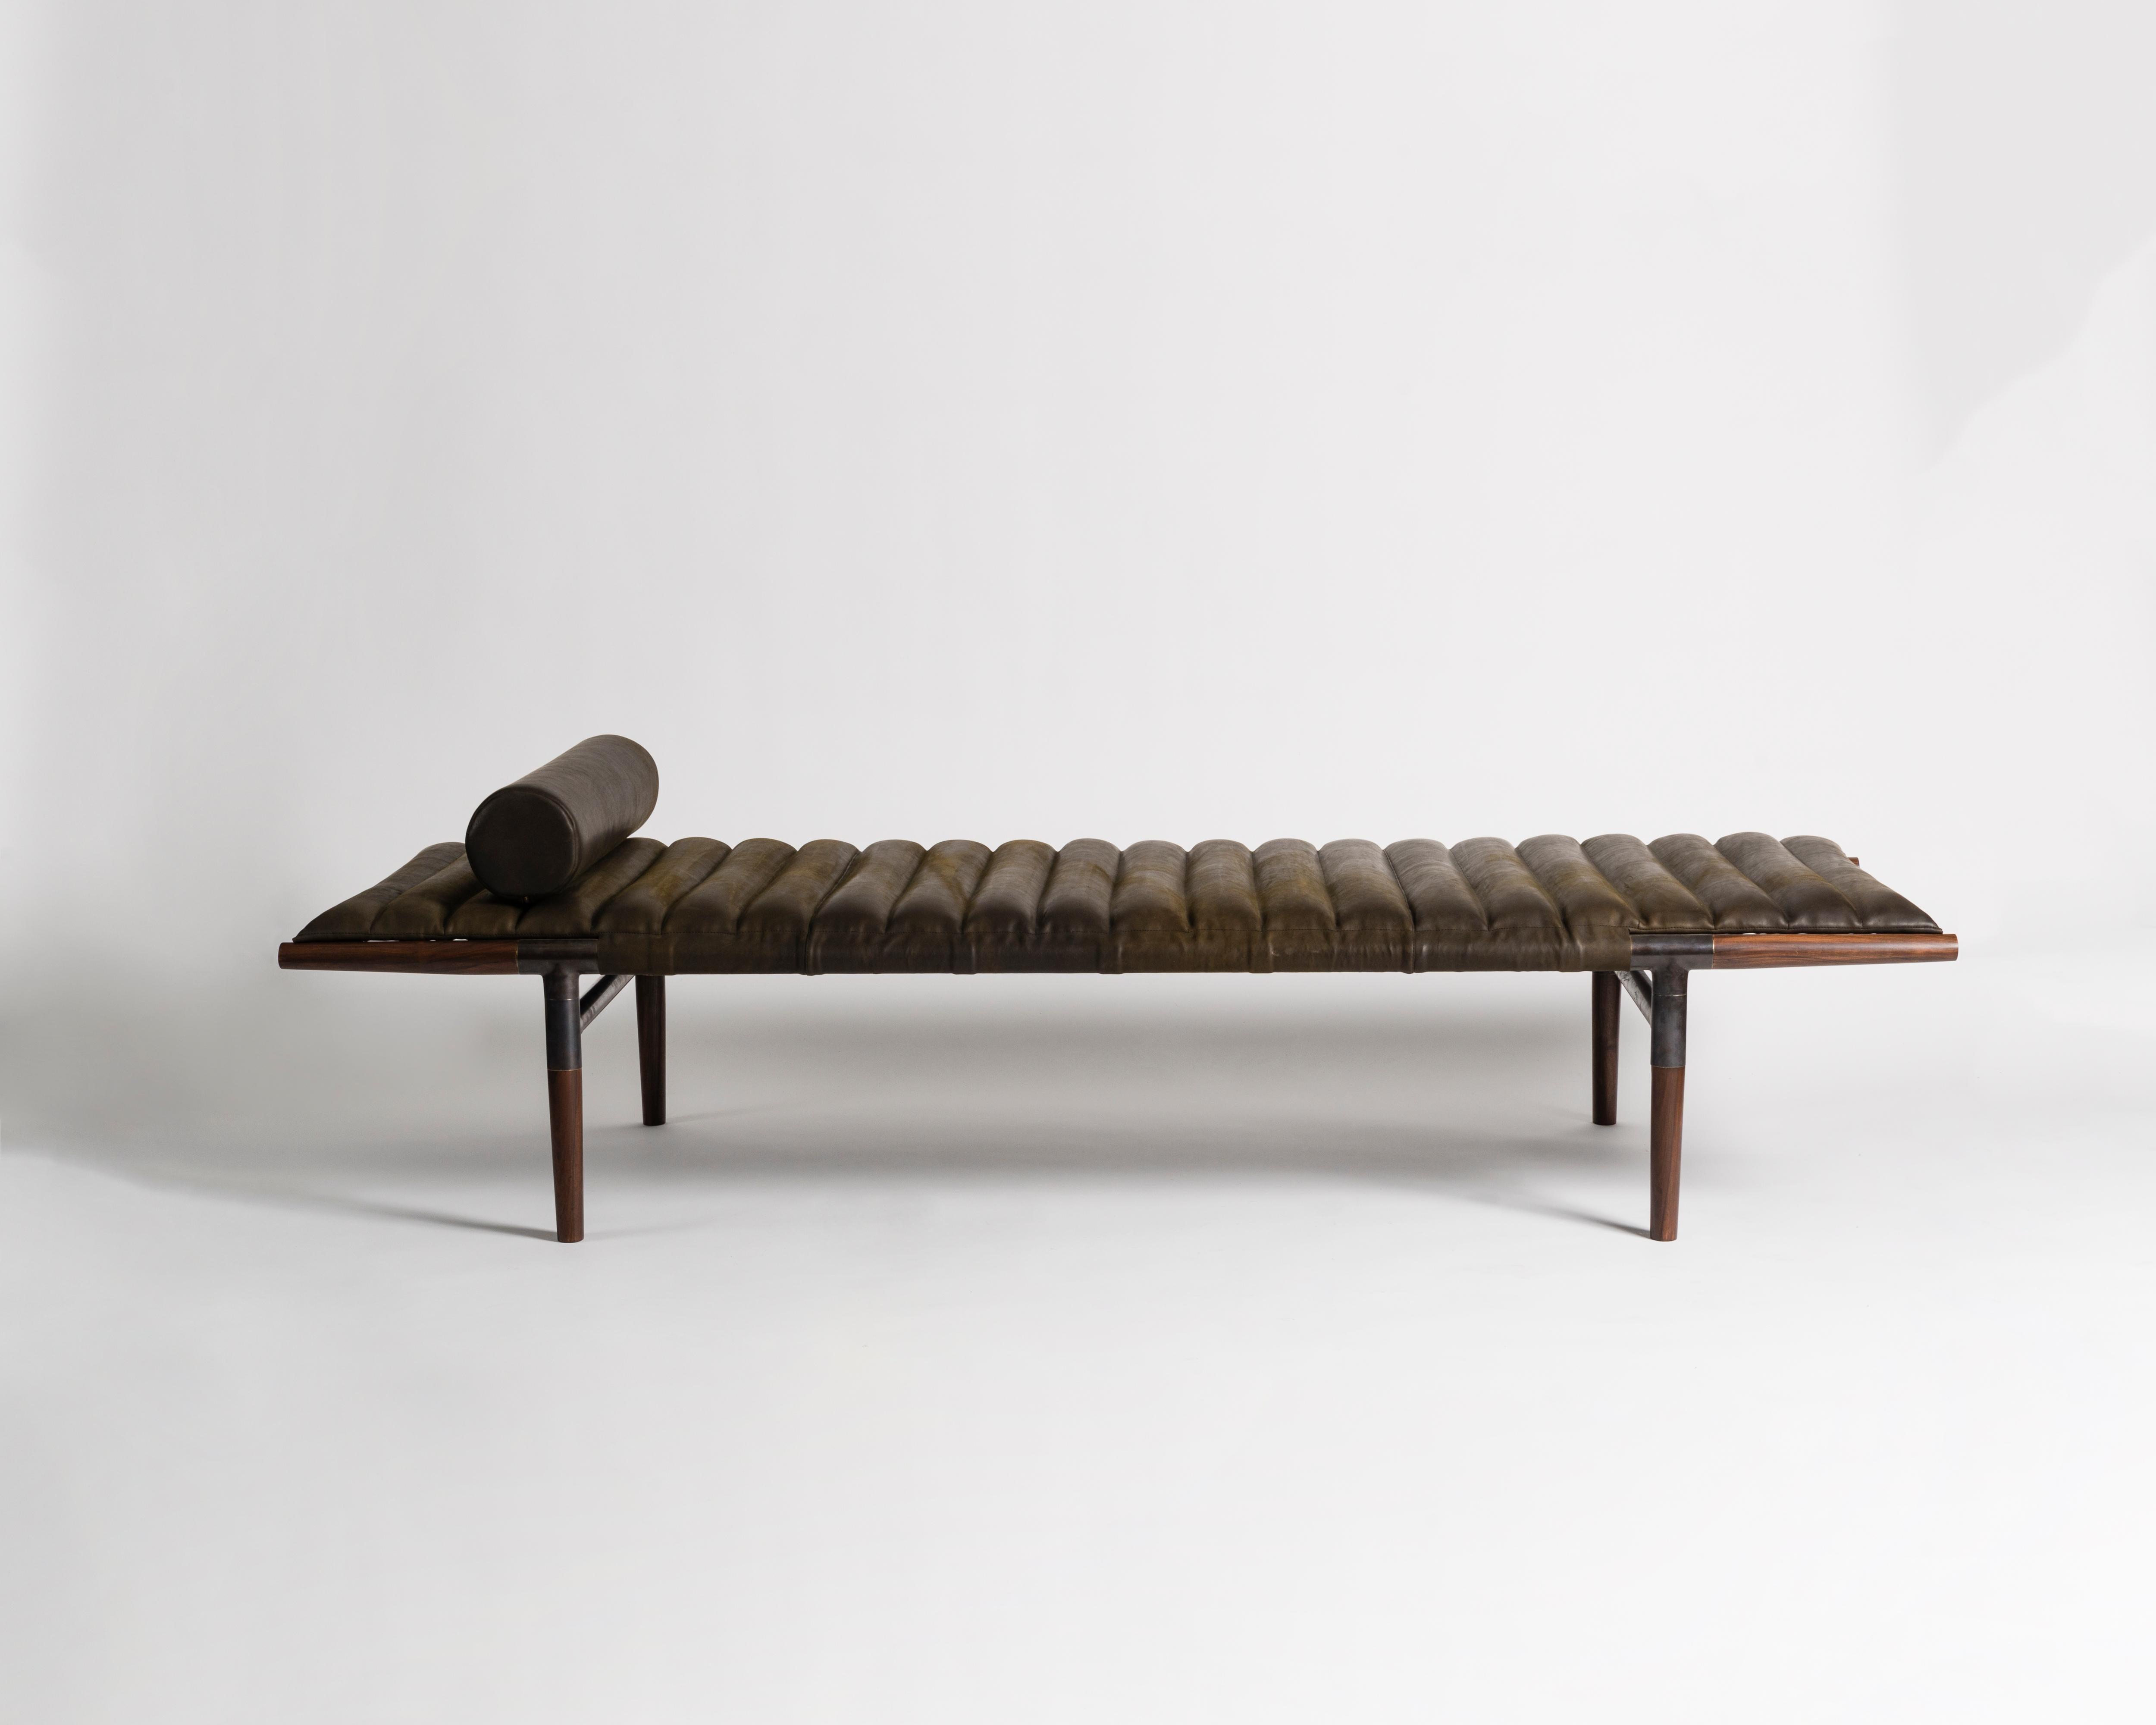 The EÆ daybed in Horween leather with ebonized rosewood legs and blackened brass frame.
“I wanted to create something better than Mies van der Rohe,” says designer Ben Erickson of Erickson Aesthetics about his EAE daybed, which bears a striking